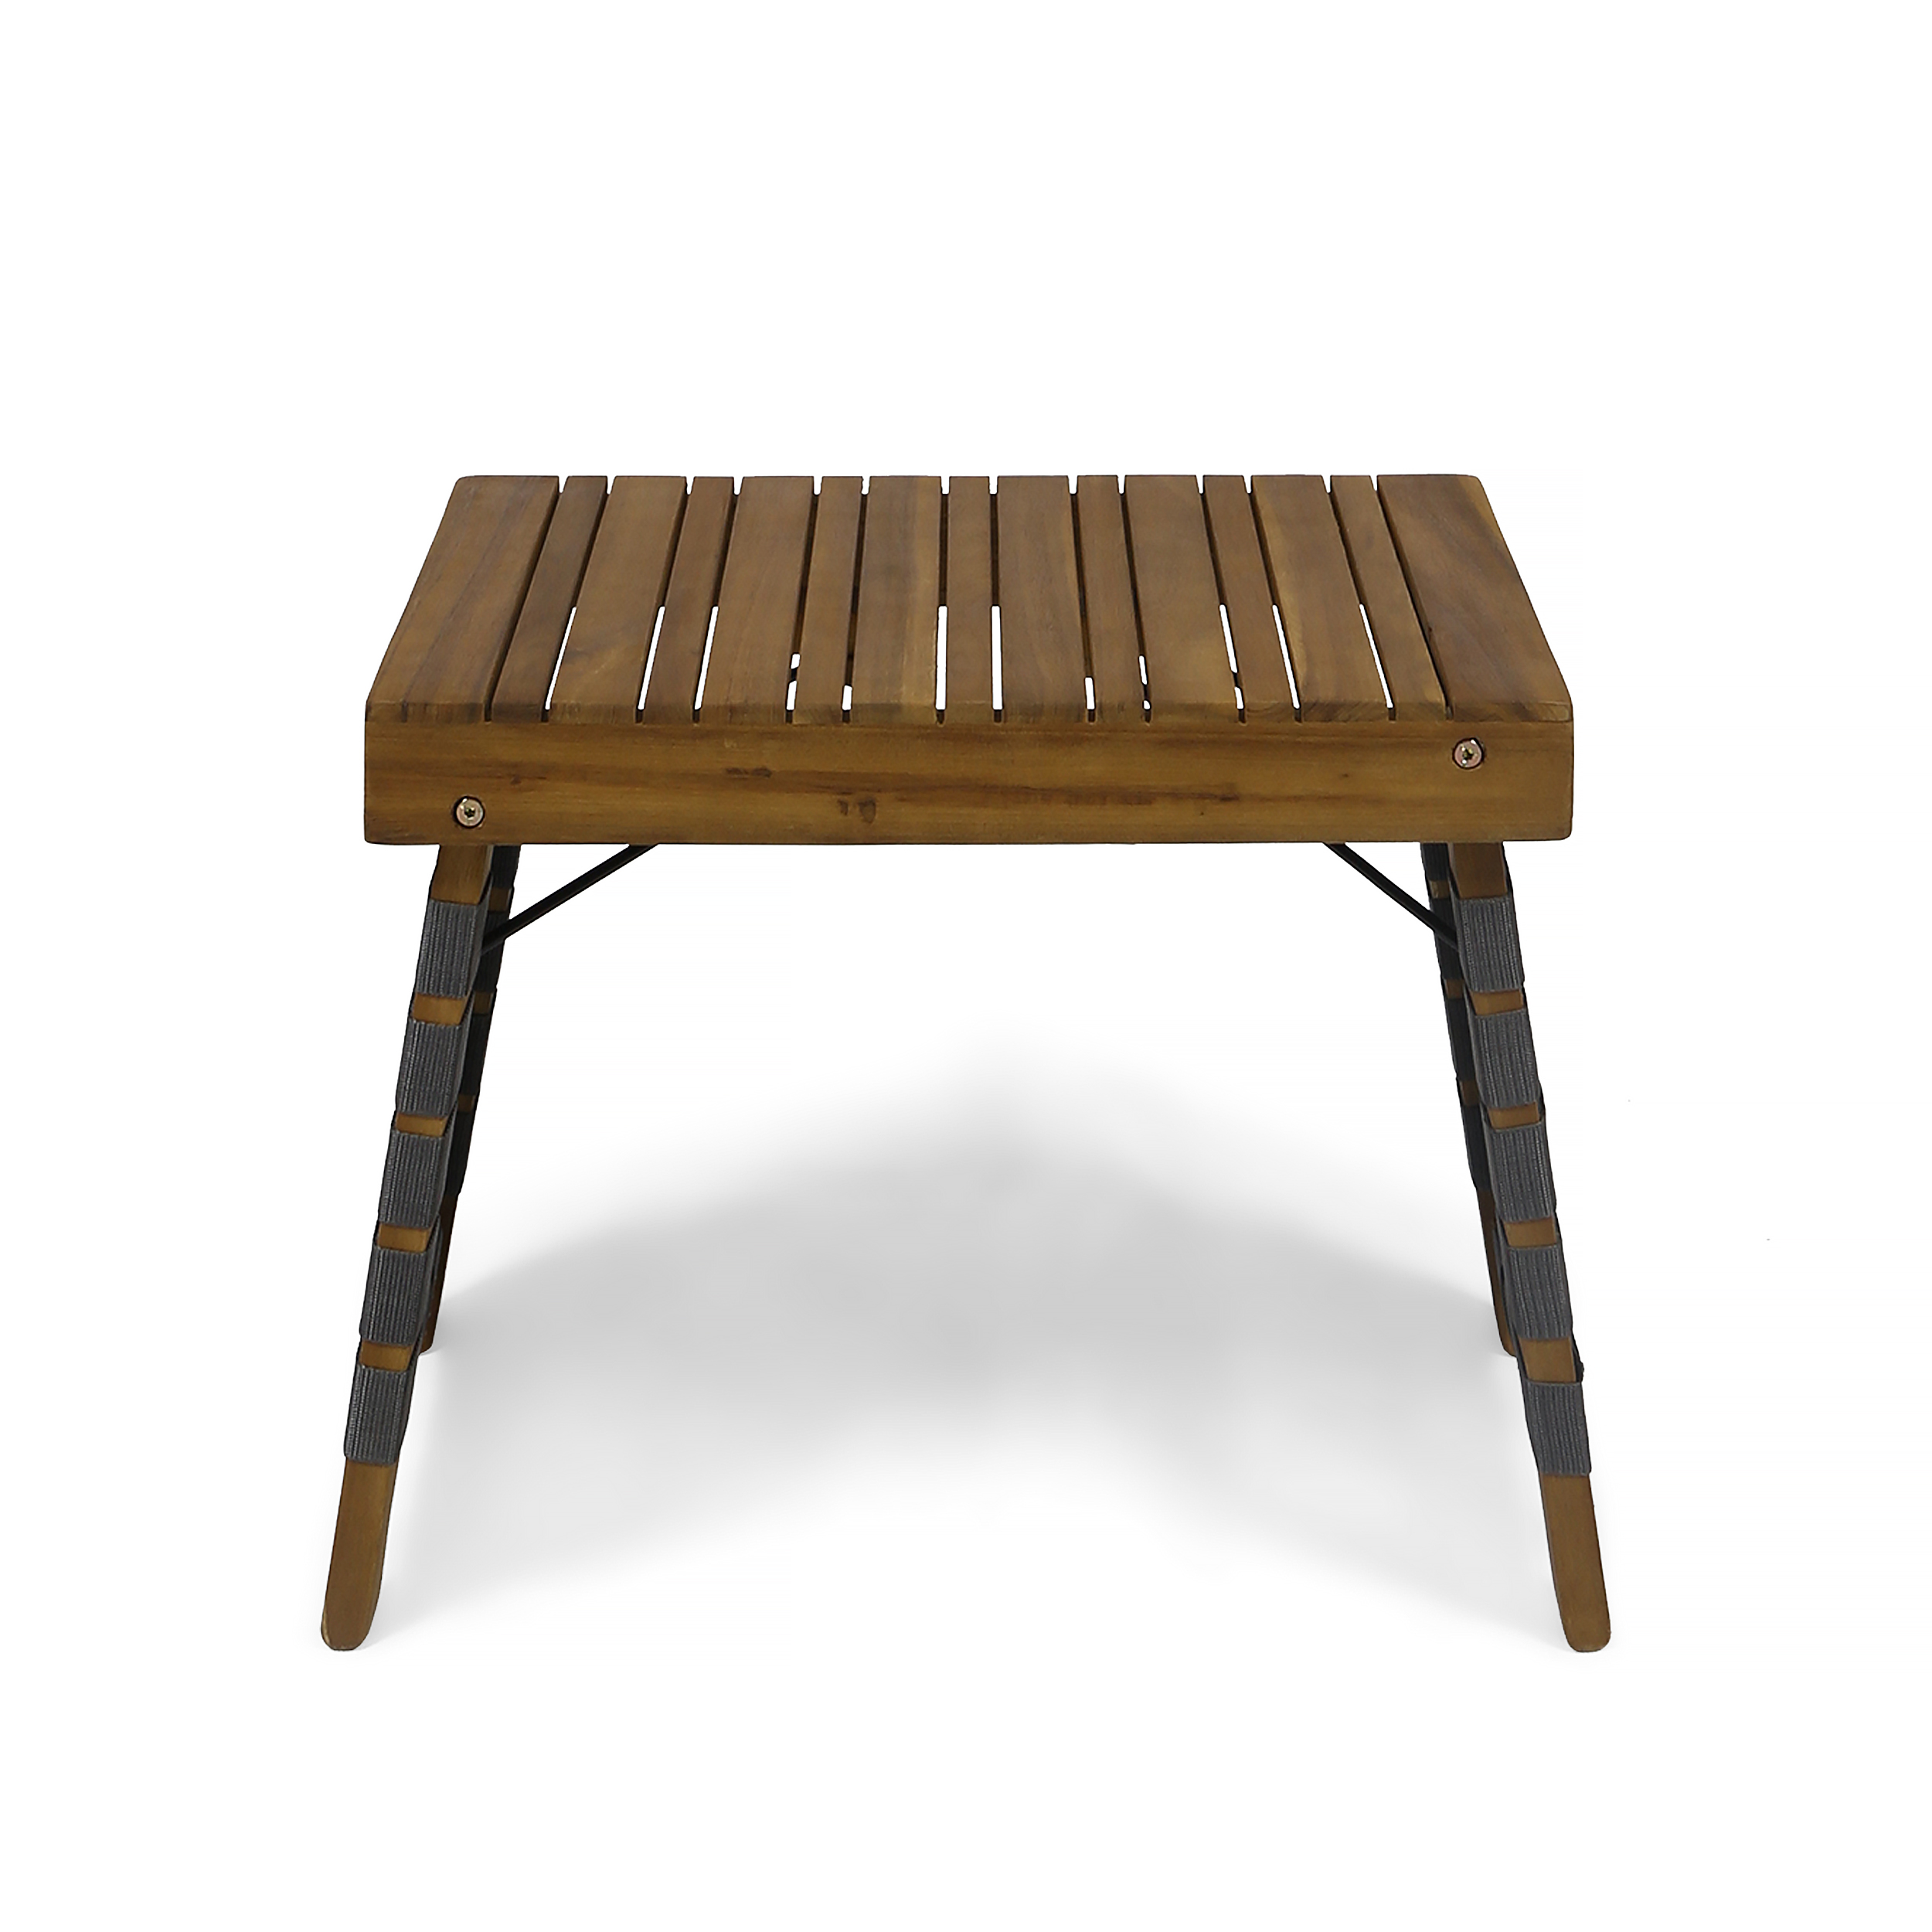 Bezalel Outdoor Acacia Wood Foldable Side Table, Brown Patina and Gray - image 1 of 5